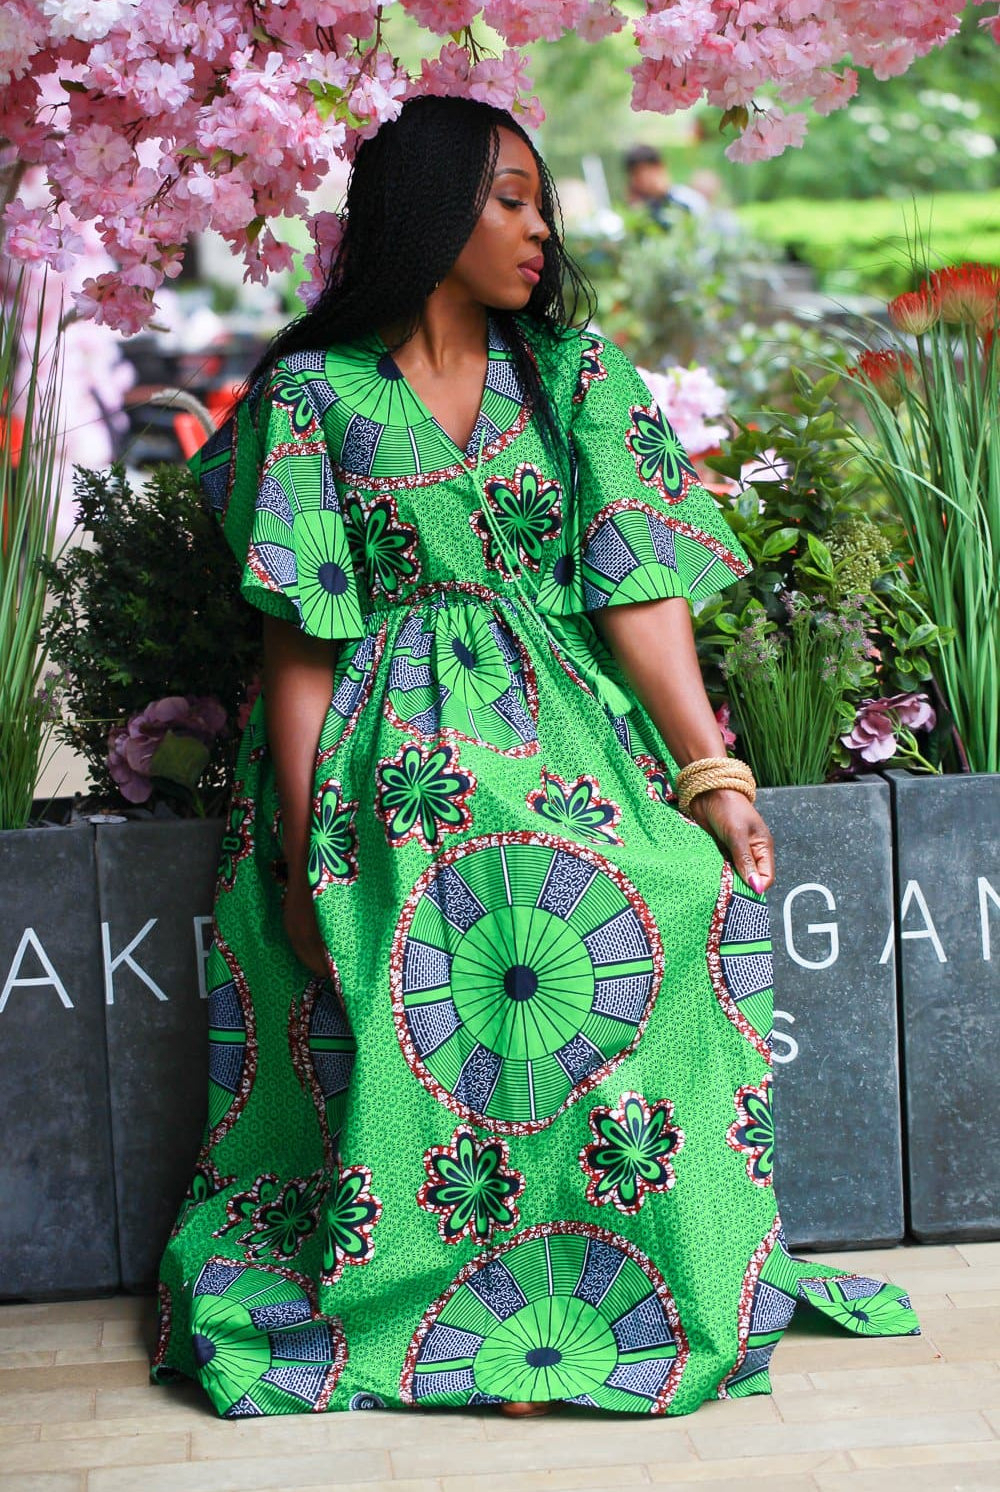 African dresses, Maxi African Print dressesAfrican print dress perfect summer fashion | African dresses, Long African print gown, African print Maxi dresses, Floral Summer Dresses | African party dress | Black owned UK fashion brand | African clothing store | Ready to wear African clothing | African print maxi dress | African Kampala dress | Kampala dress | Kitenge dress | Sleeveless Maxi African dress | Online African Clothing Store